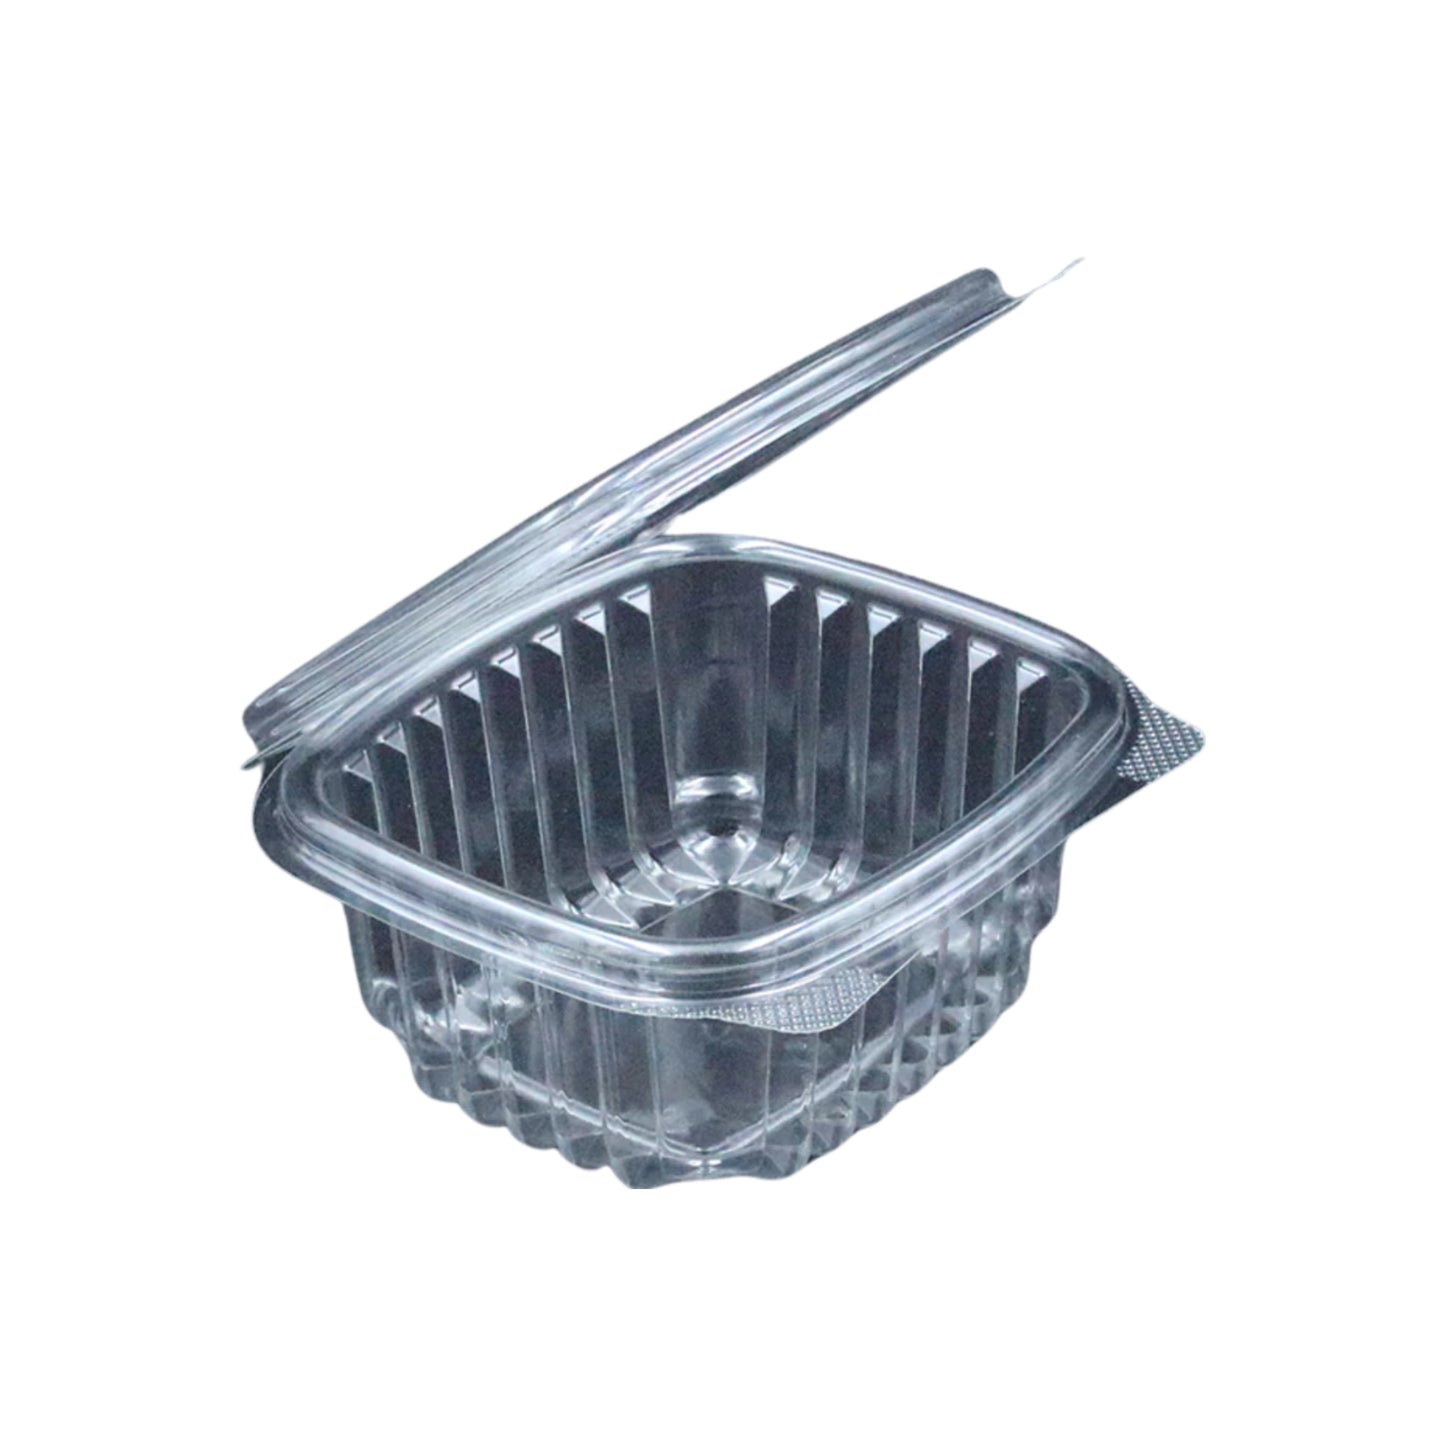 KIS-HL16G | 16oz, 473ml Clear Hinged PET Container; $0.248/pc